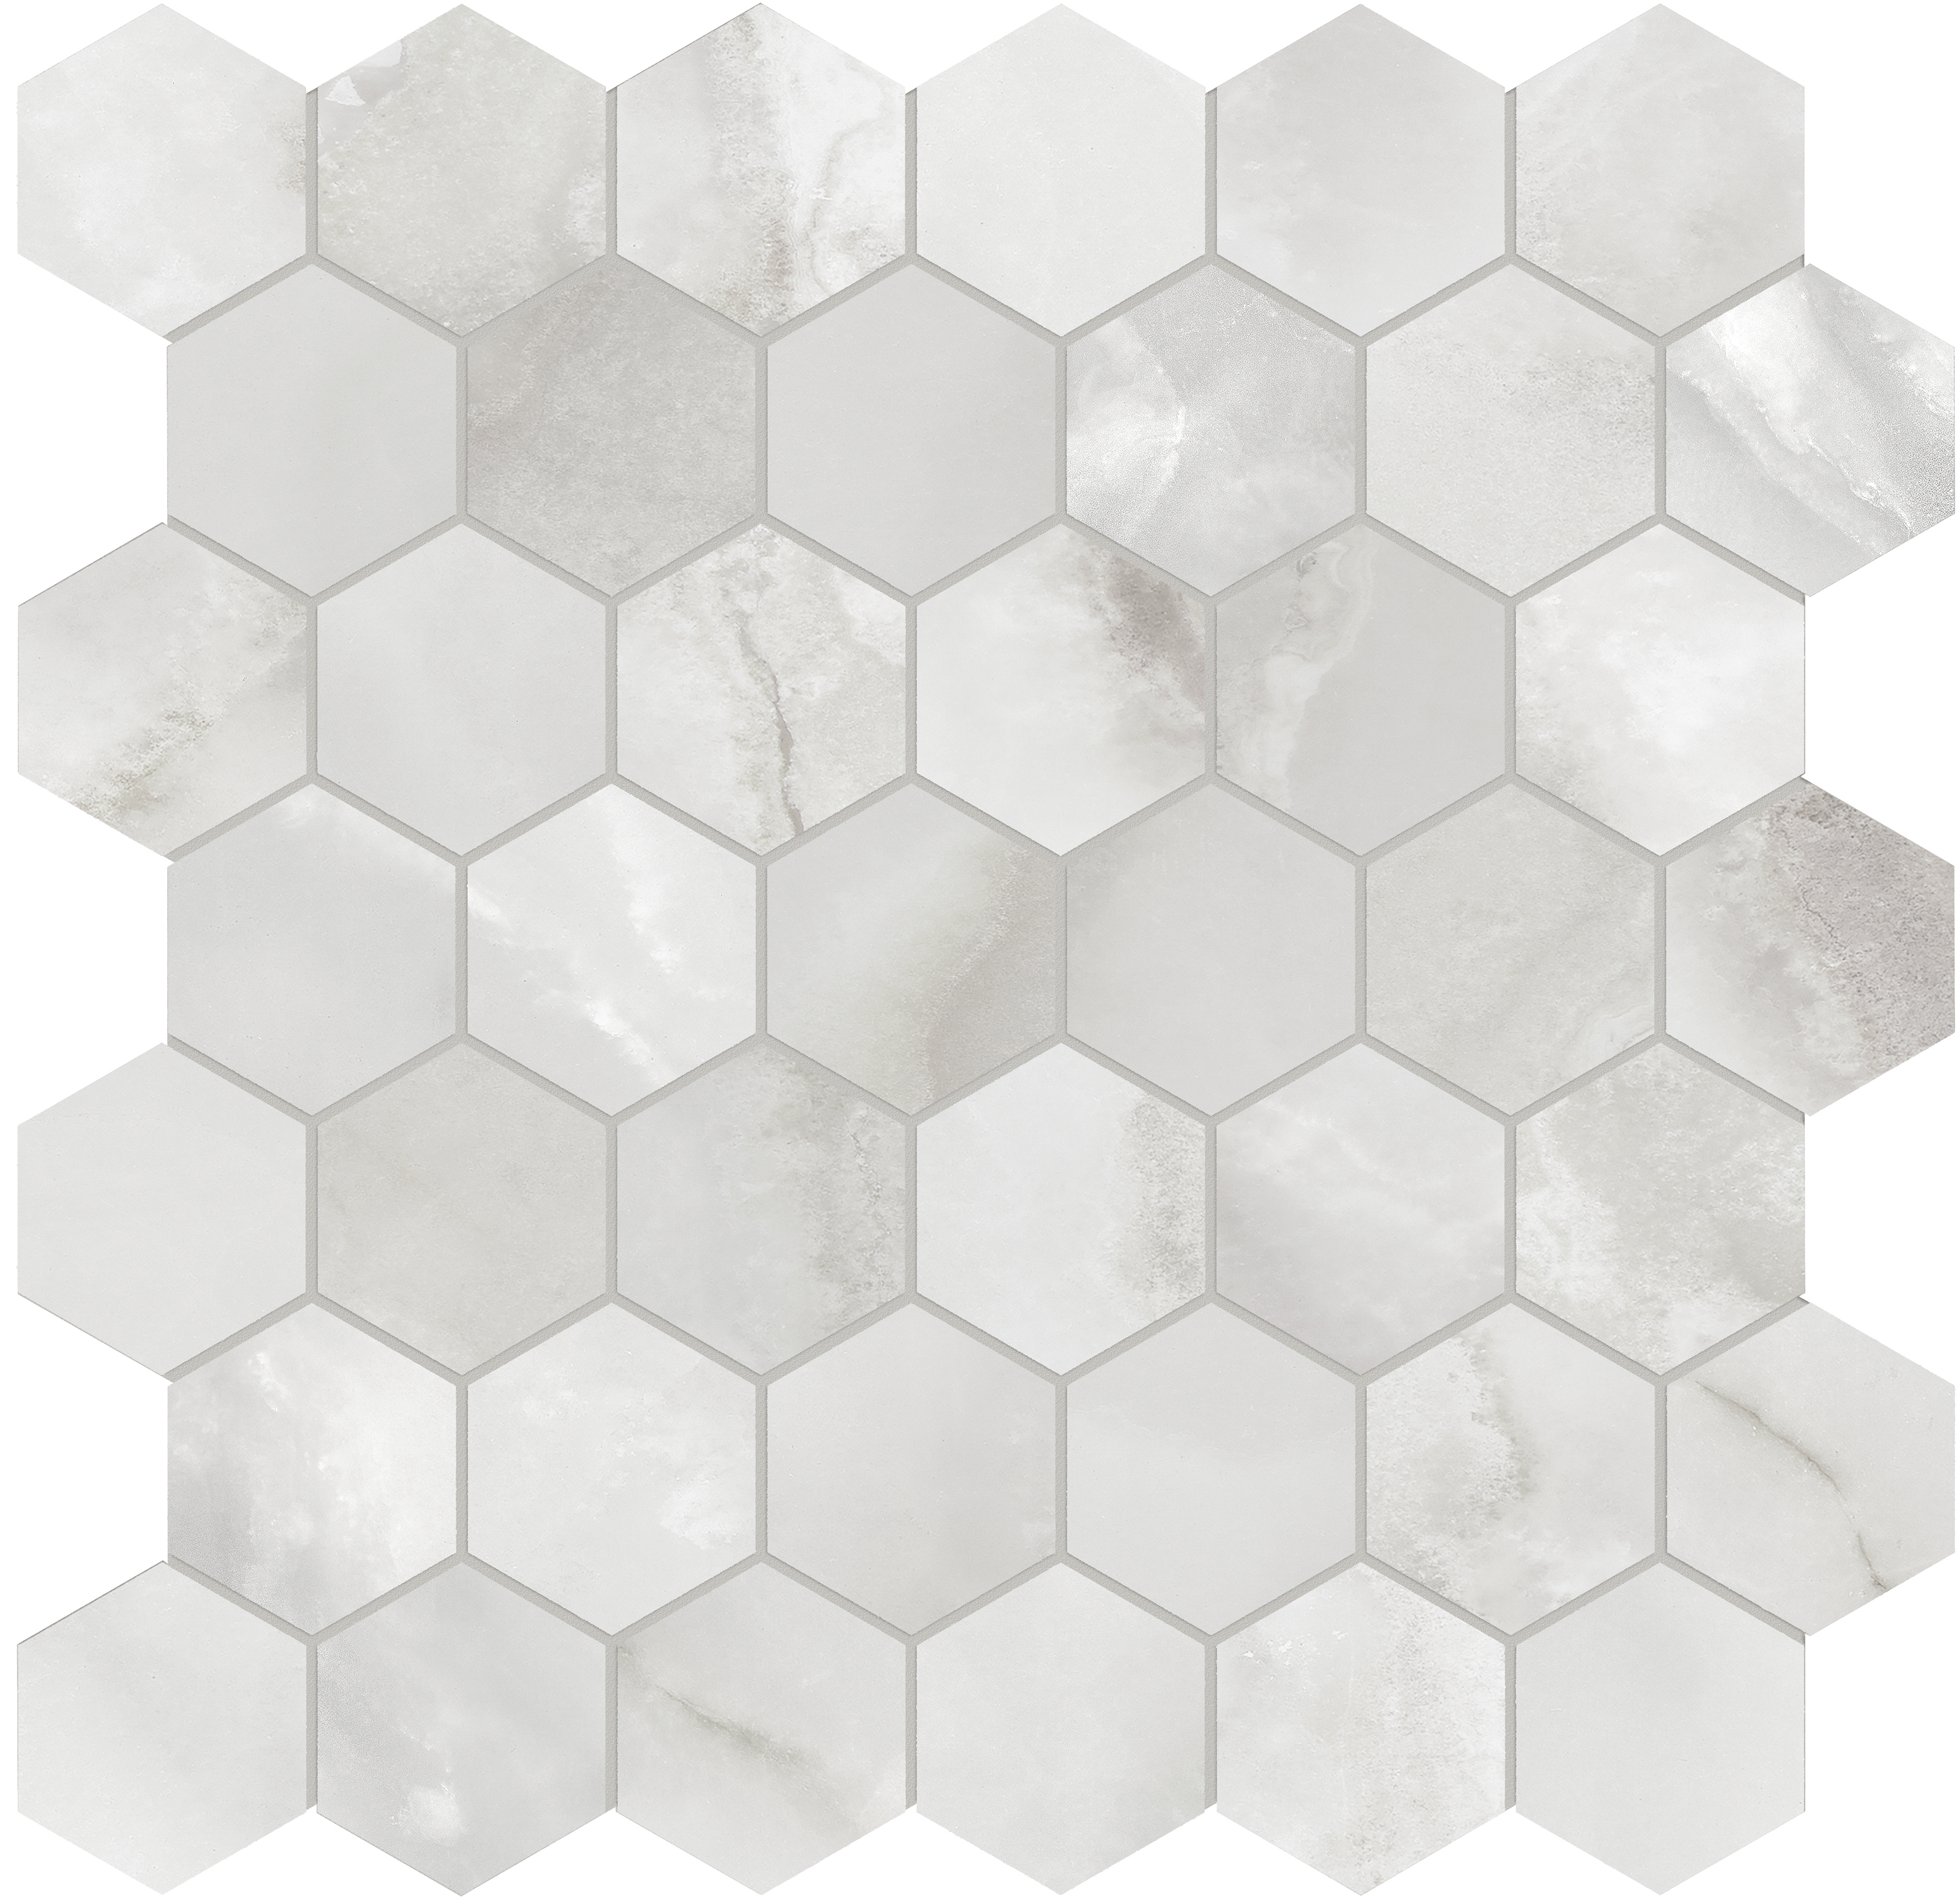 onyx nuvolato hexagon 2-inch pattern glazed porcelain mosaic from la marca anatolia collection distributed by surface group international honed finish straight edge edge mesh shape